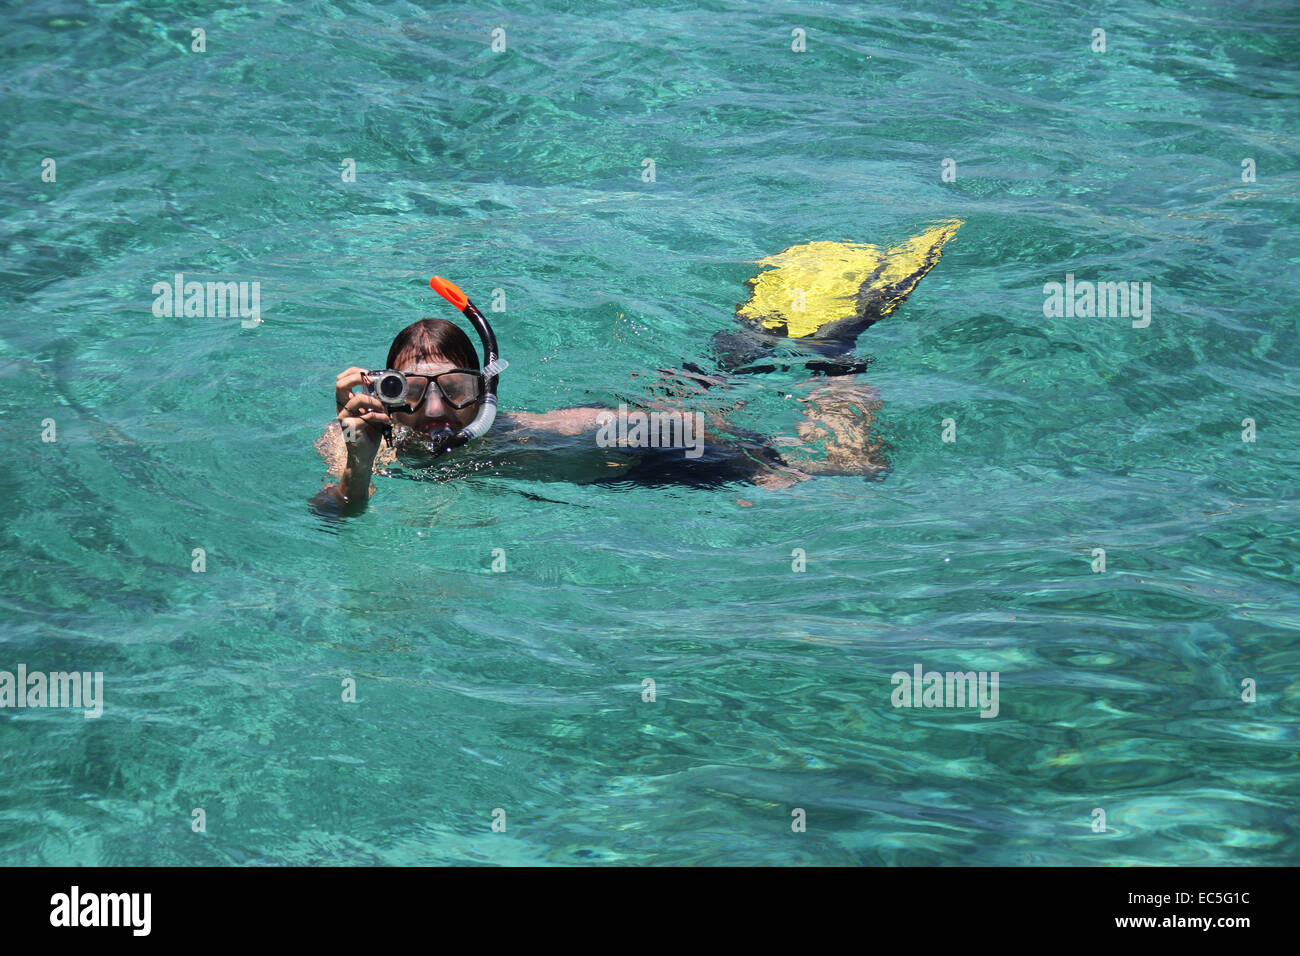 Man photographed while snorkeling in the Indian Ocean Stock Photo